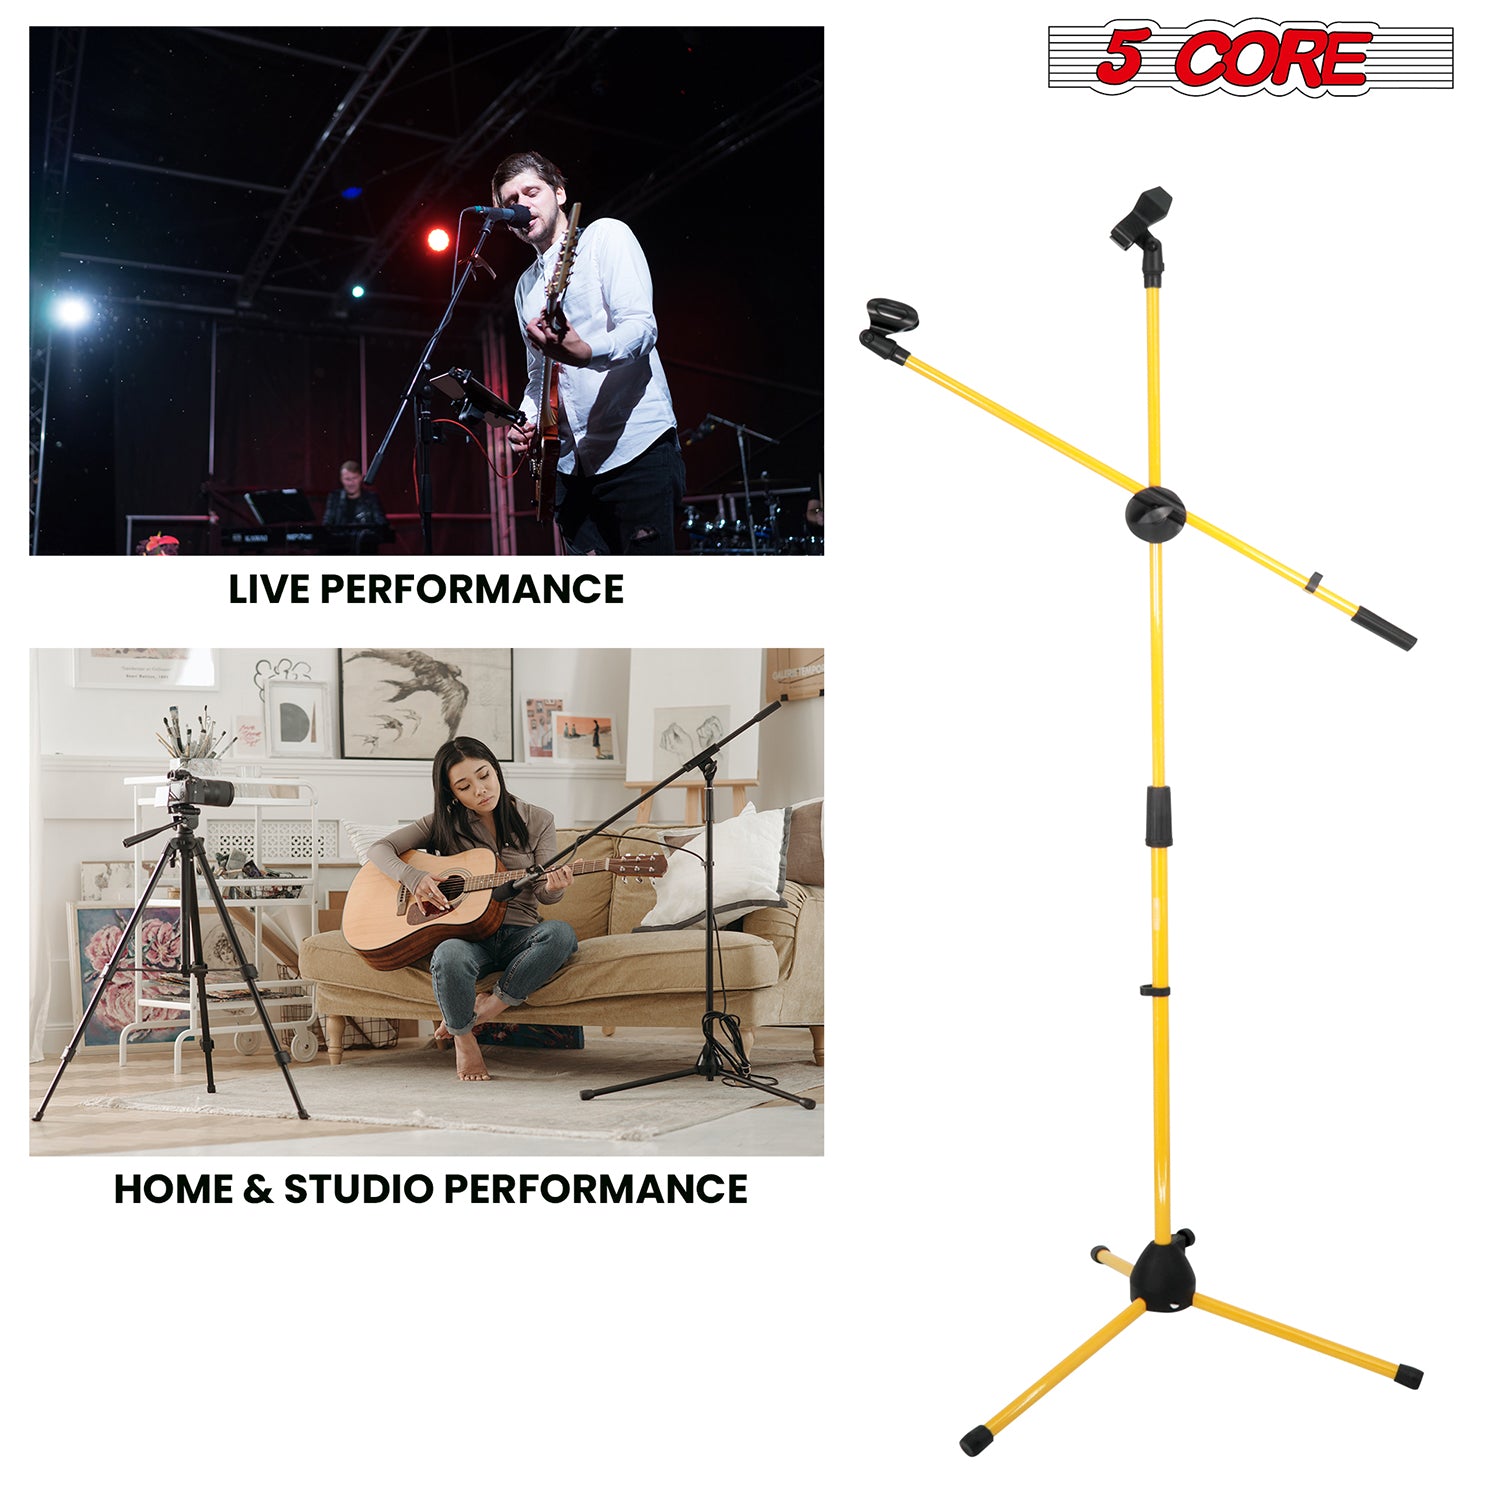 5 Core Mic Stand Collapsible Height Adjustable 31 to 59” Dual Metal Microphone Tripod Stand w Boom Arm Stand Para Microfono for Singing, Karaoke, Stage and Outdoor Activities 2Pc Yellow - MS DBL G YLW 2pcs